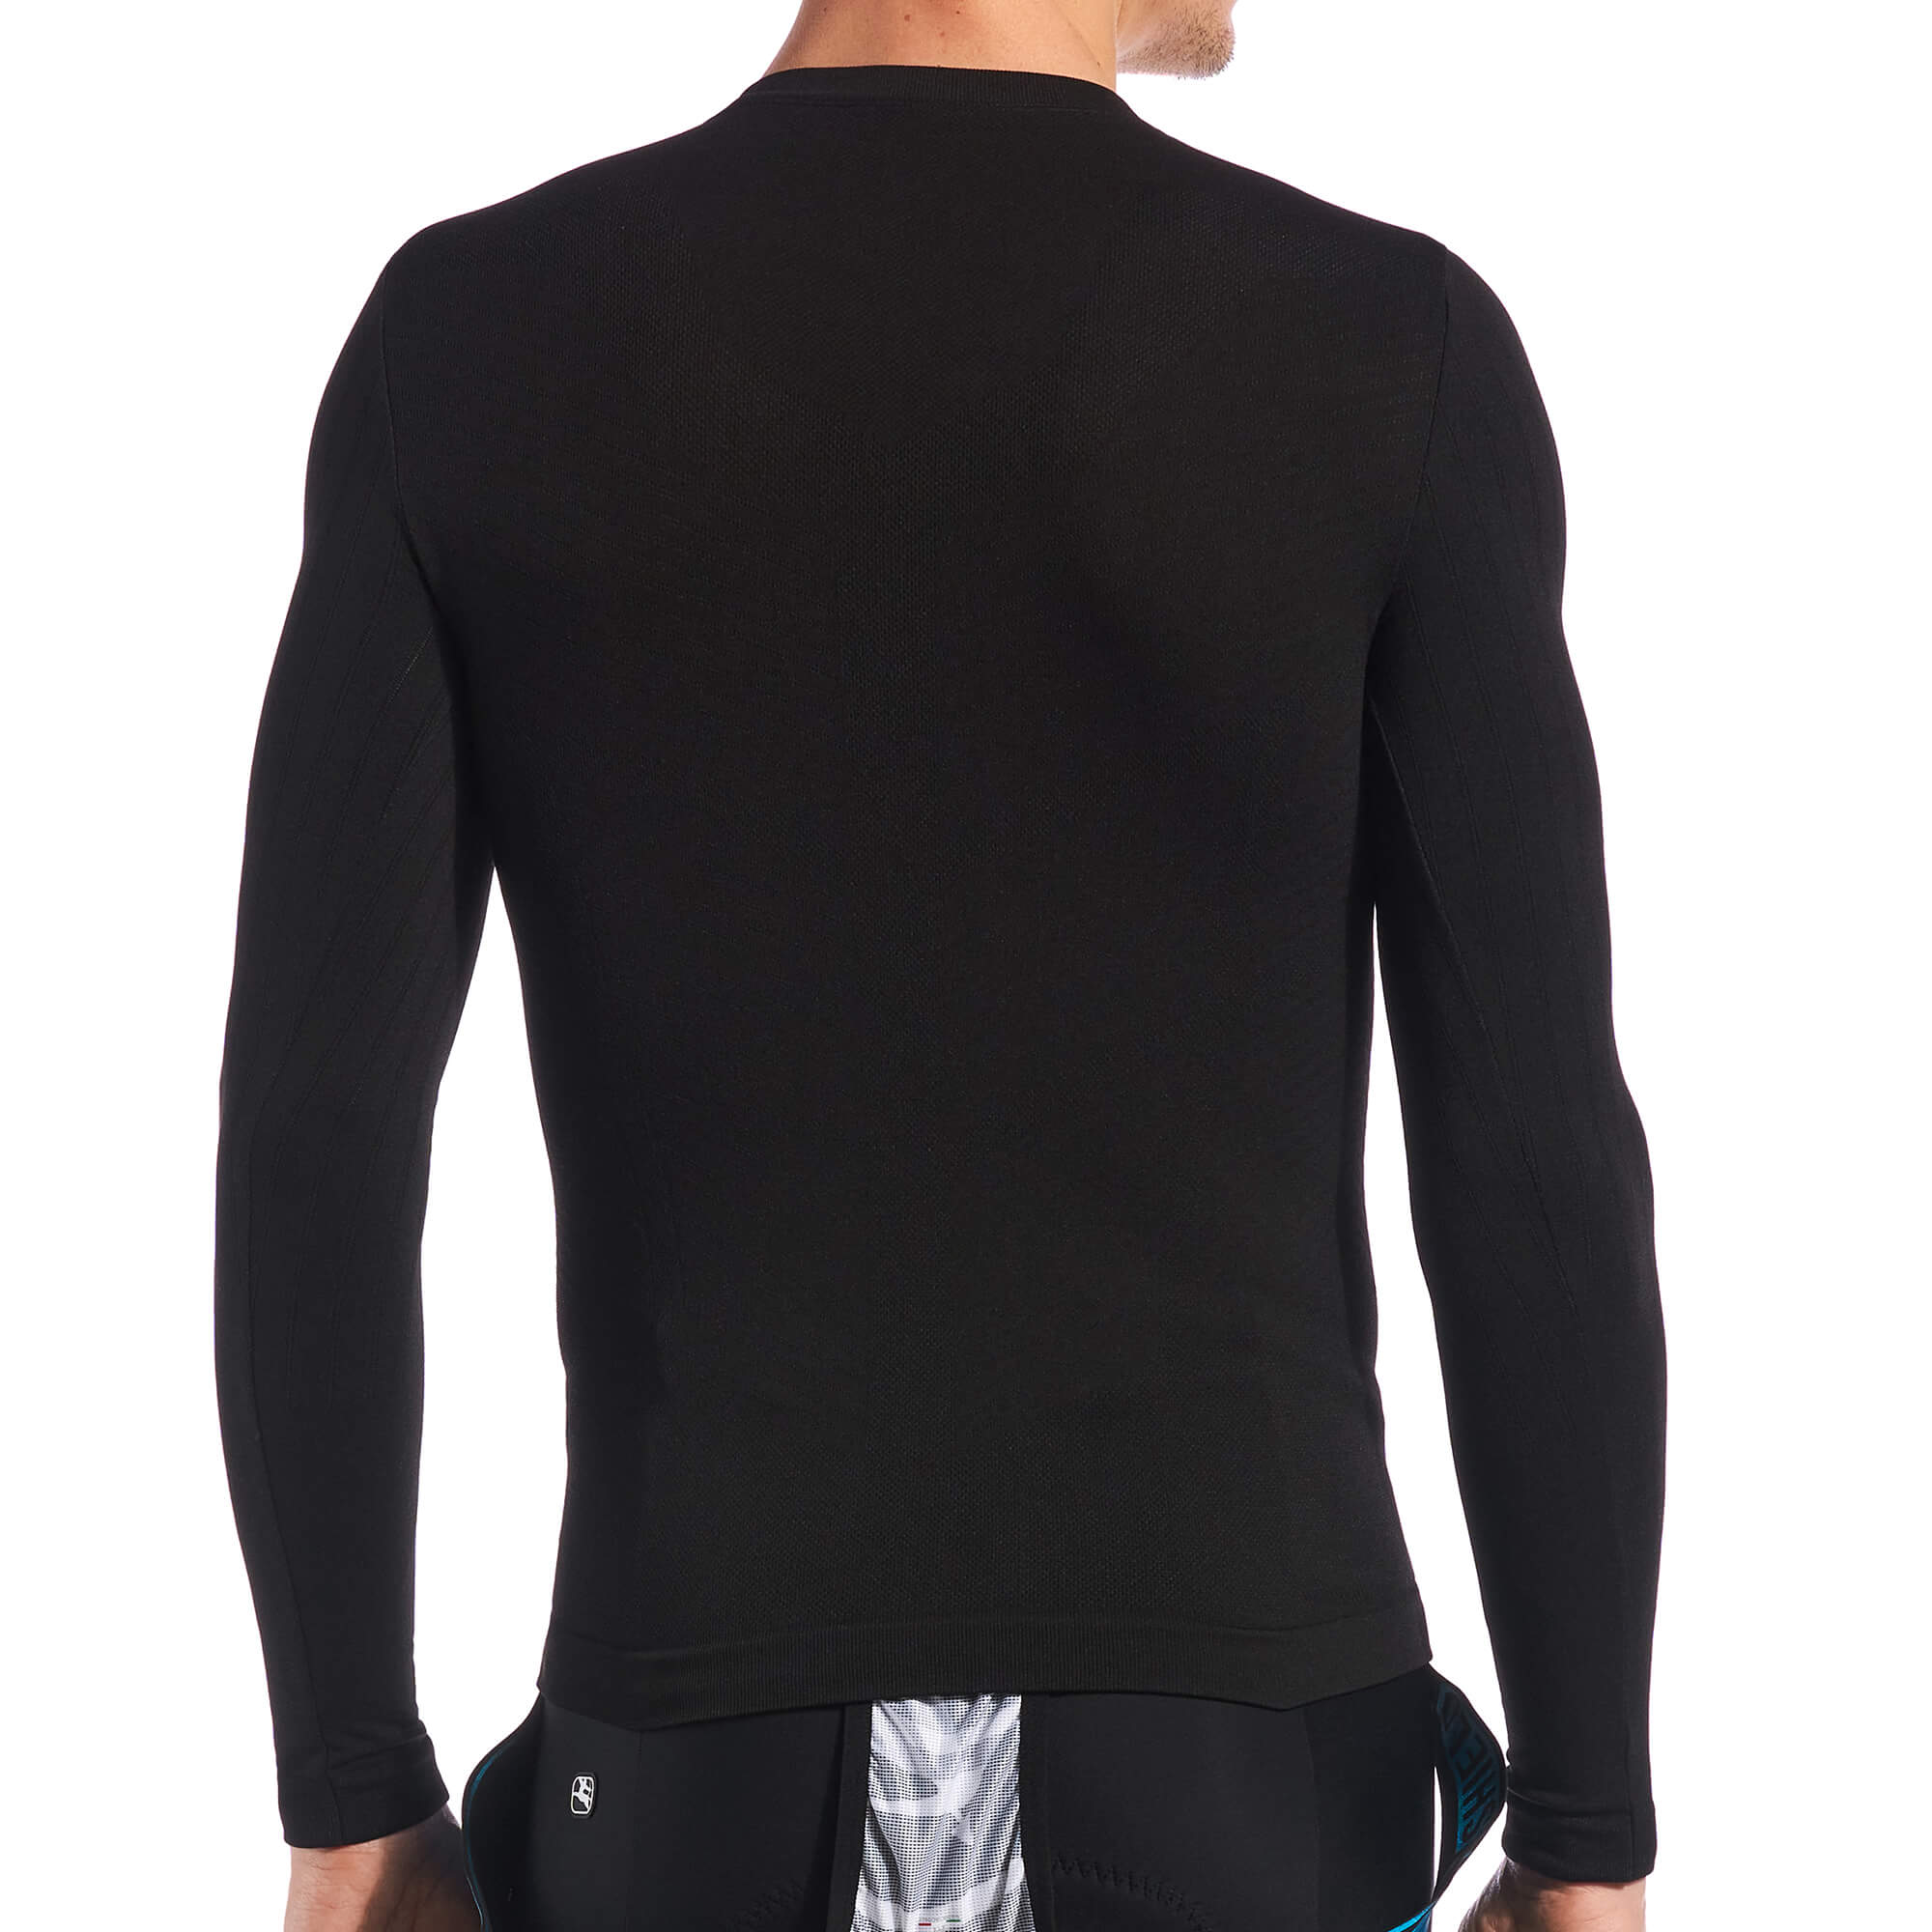 Heavyweight Knitted Long Sleeve Base Layer